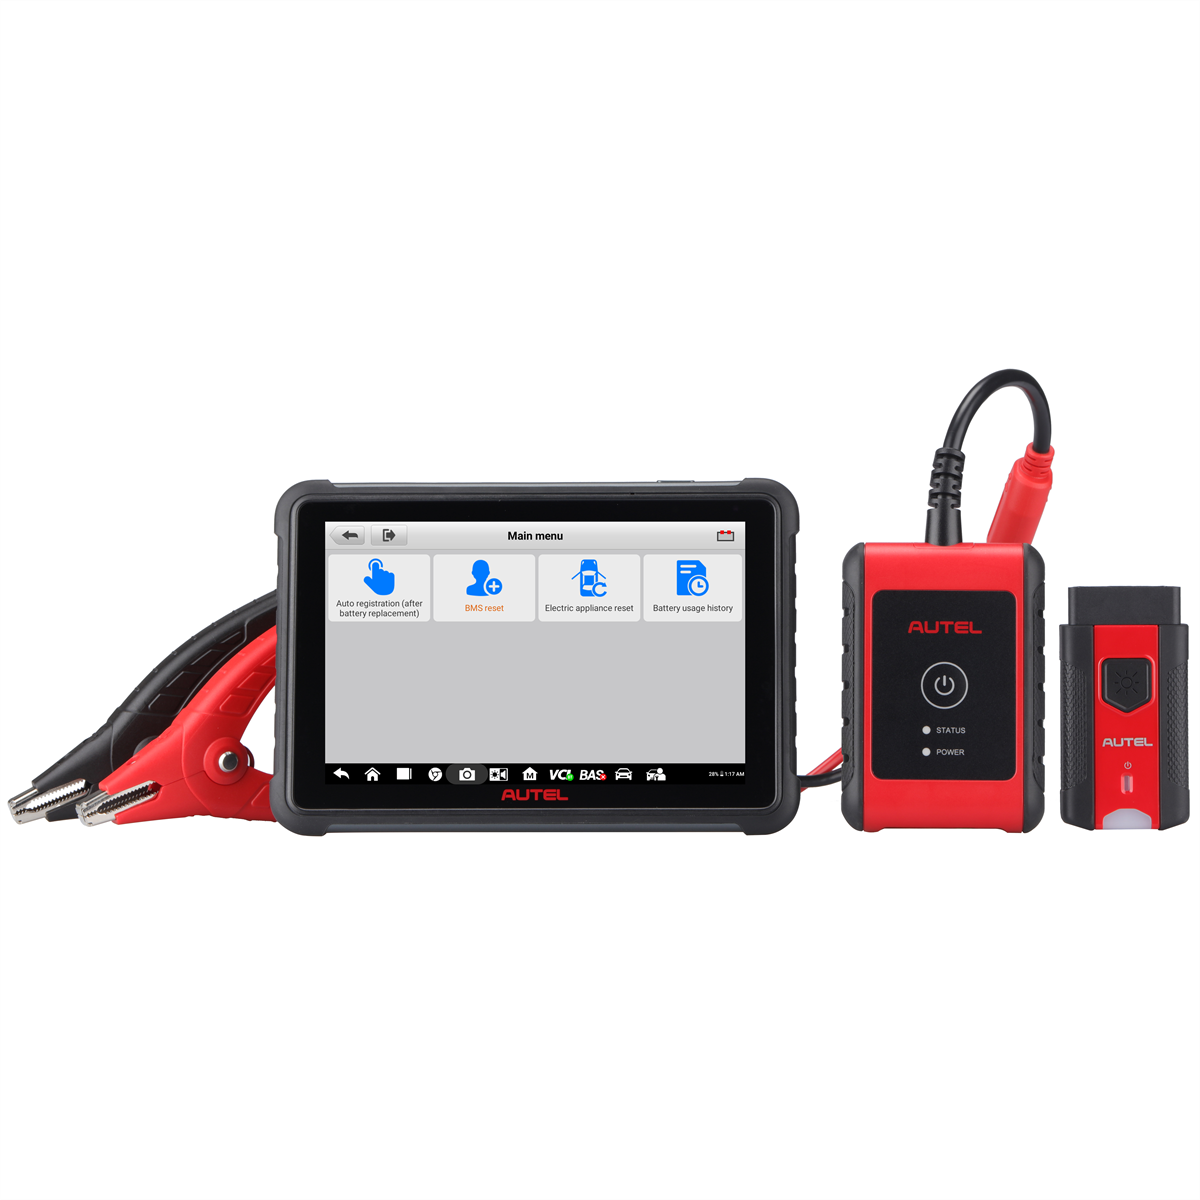 Picture of Autel AULBT609 7 in. 5V 2A Wireless Battery & Electrical System Diagnostics Tablet Analysis Tool